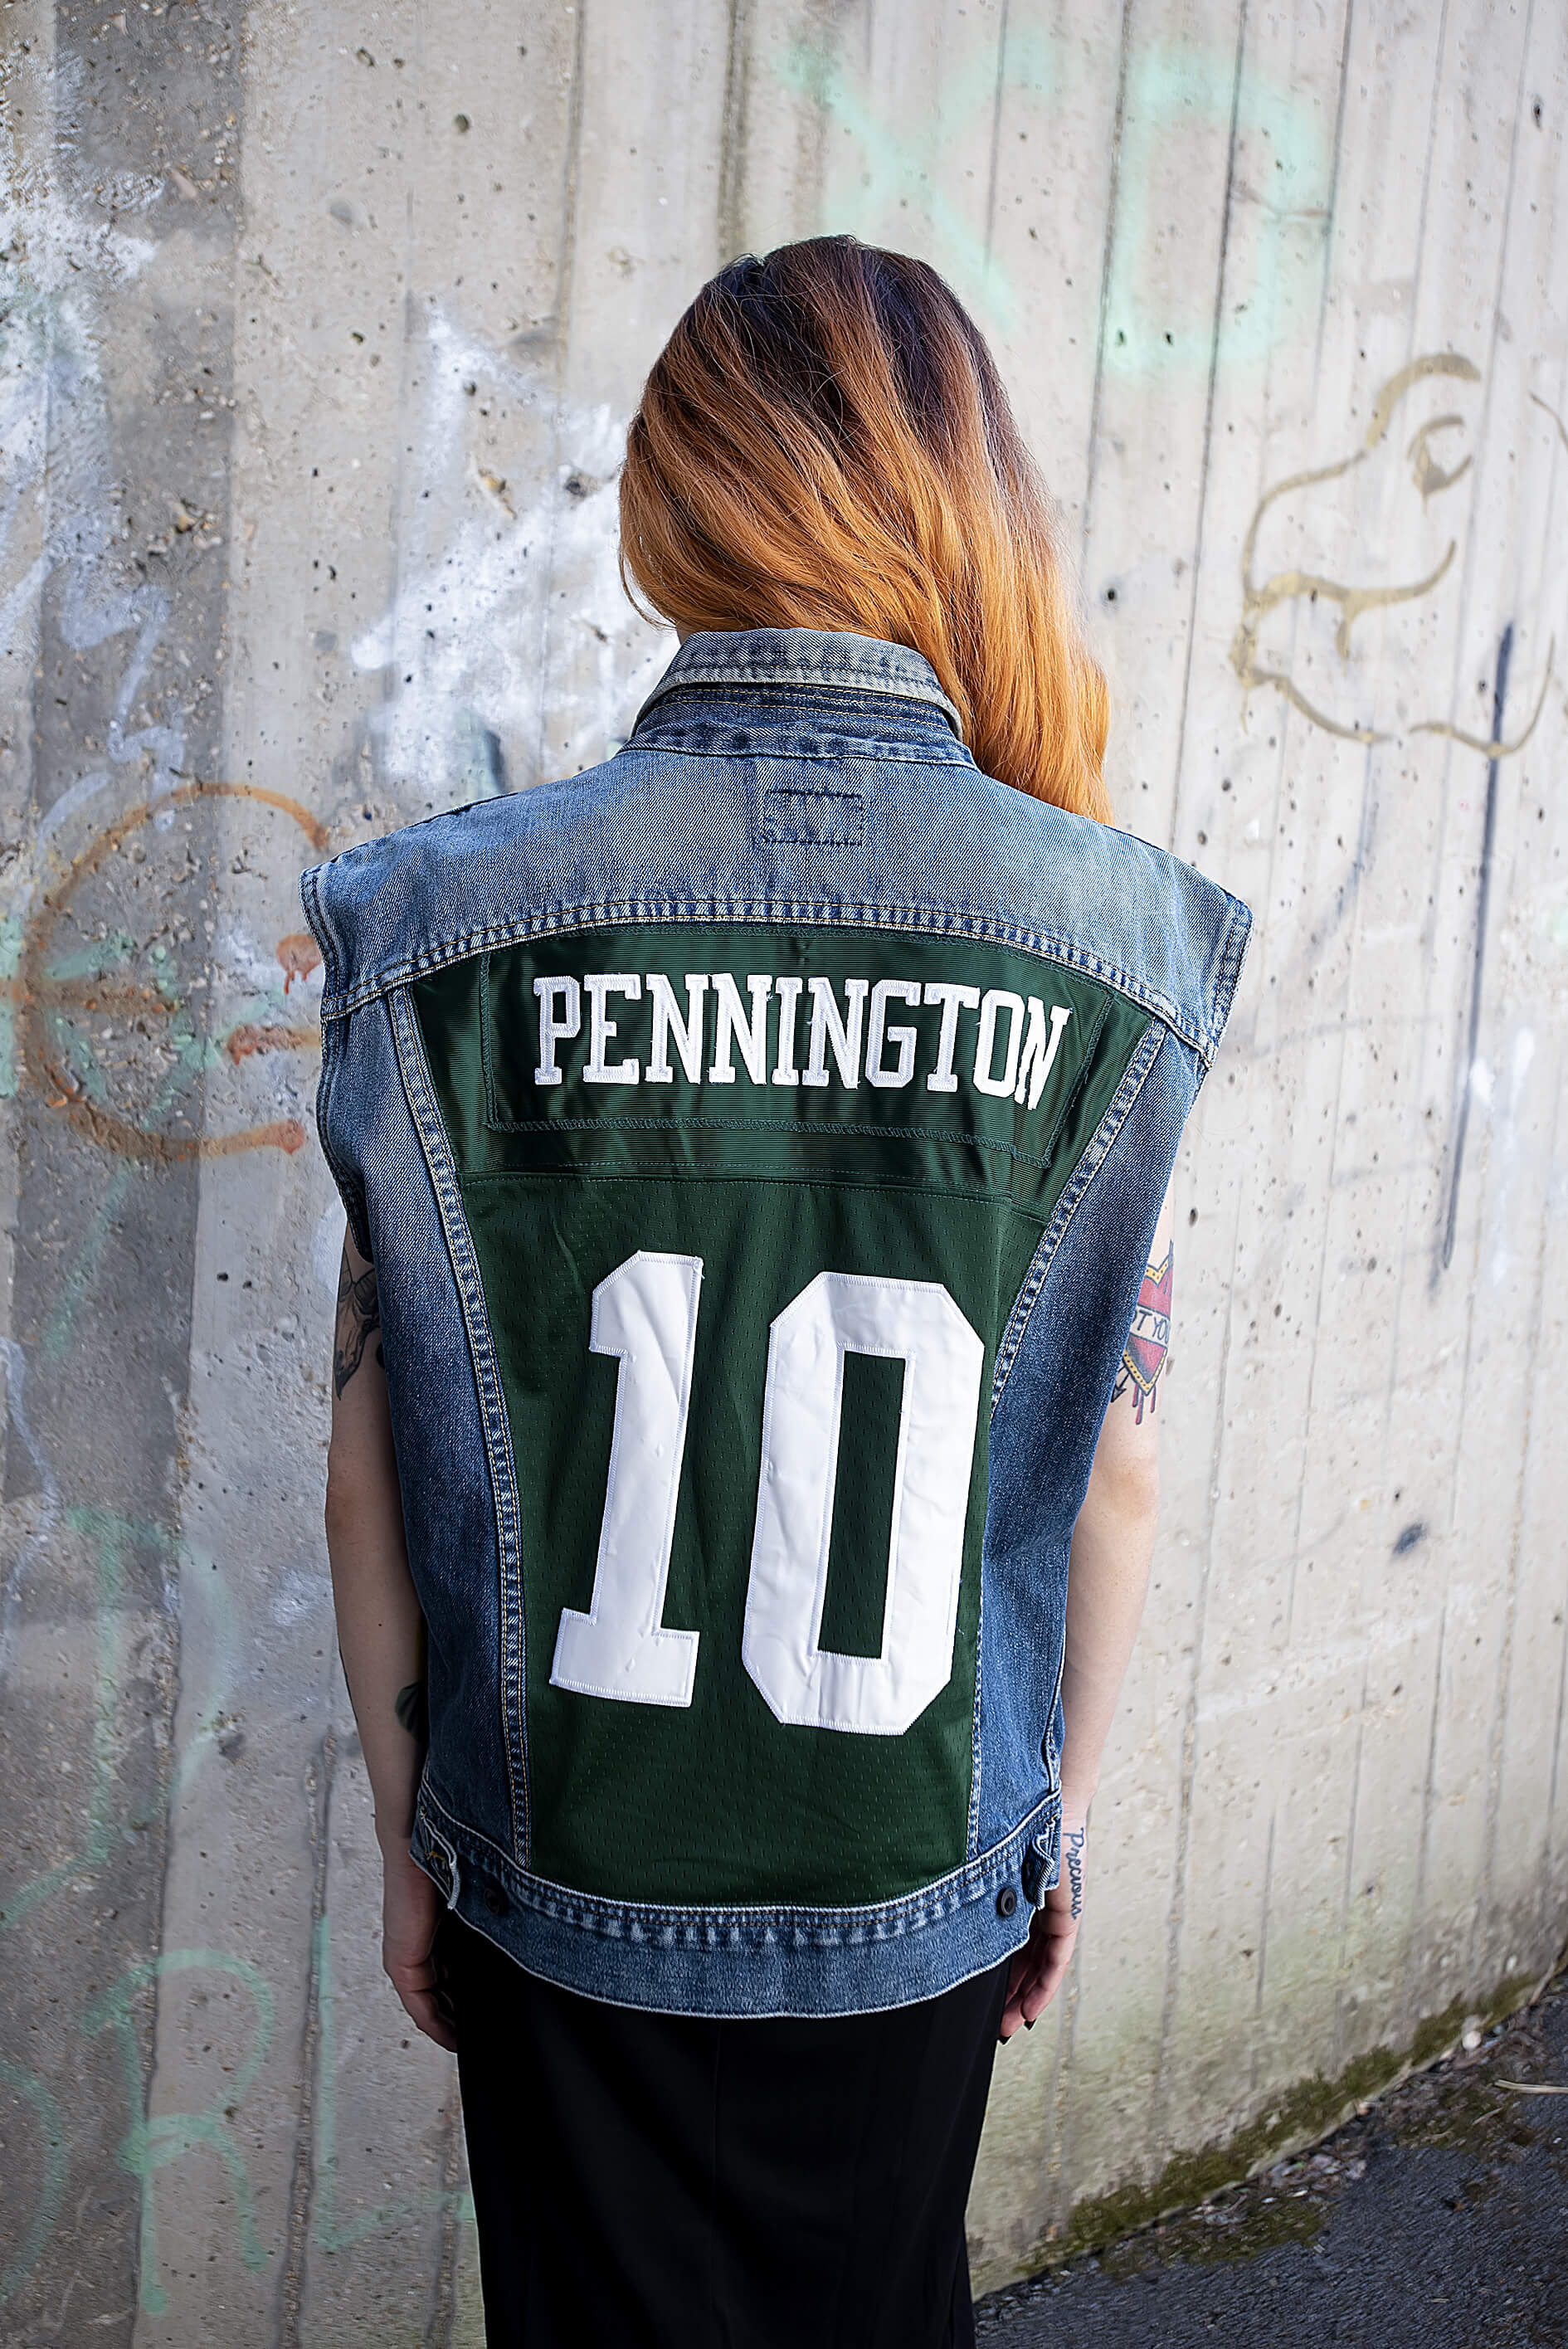 ➽ AUSTIN - men's levis sleeveless + american basketball jersey: vintage  gilet made in upcycling, vintage online shop, slow fashion brand |  